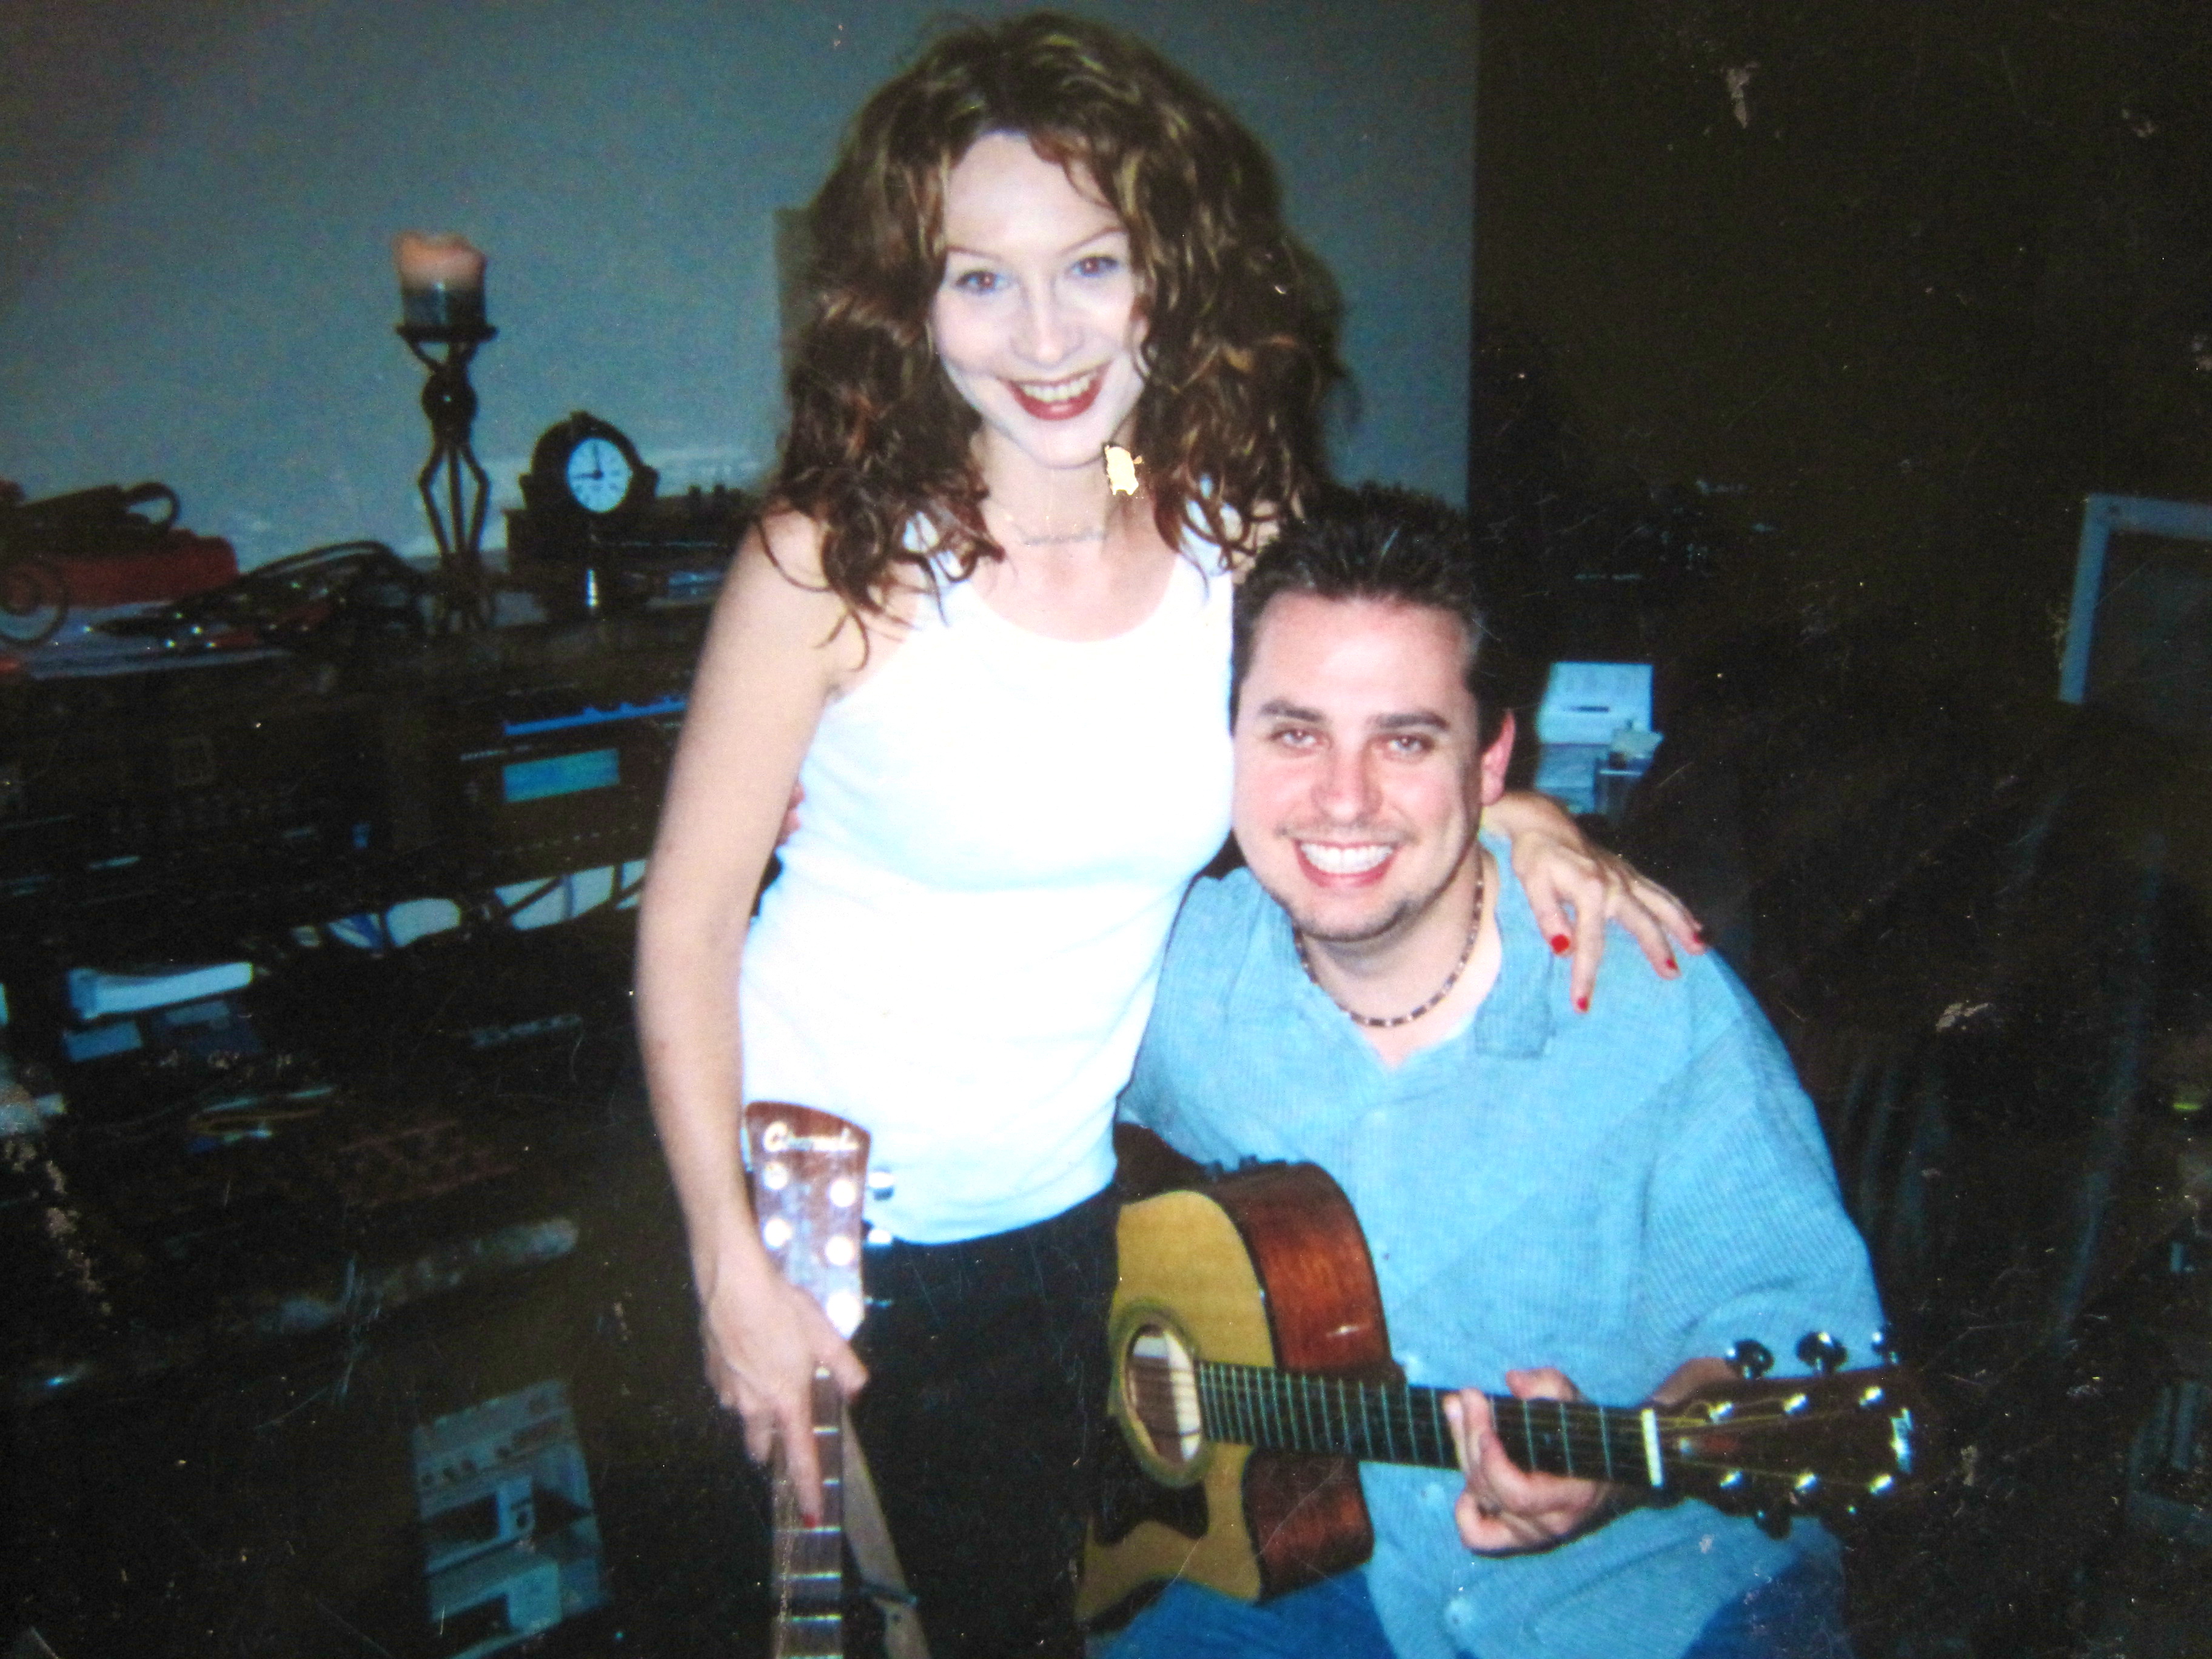 Writing session early 2000s with composer/songwriter Mike Reagan